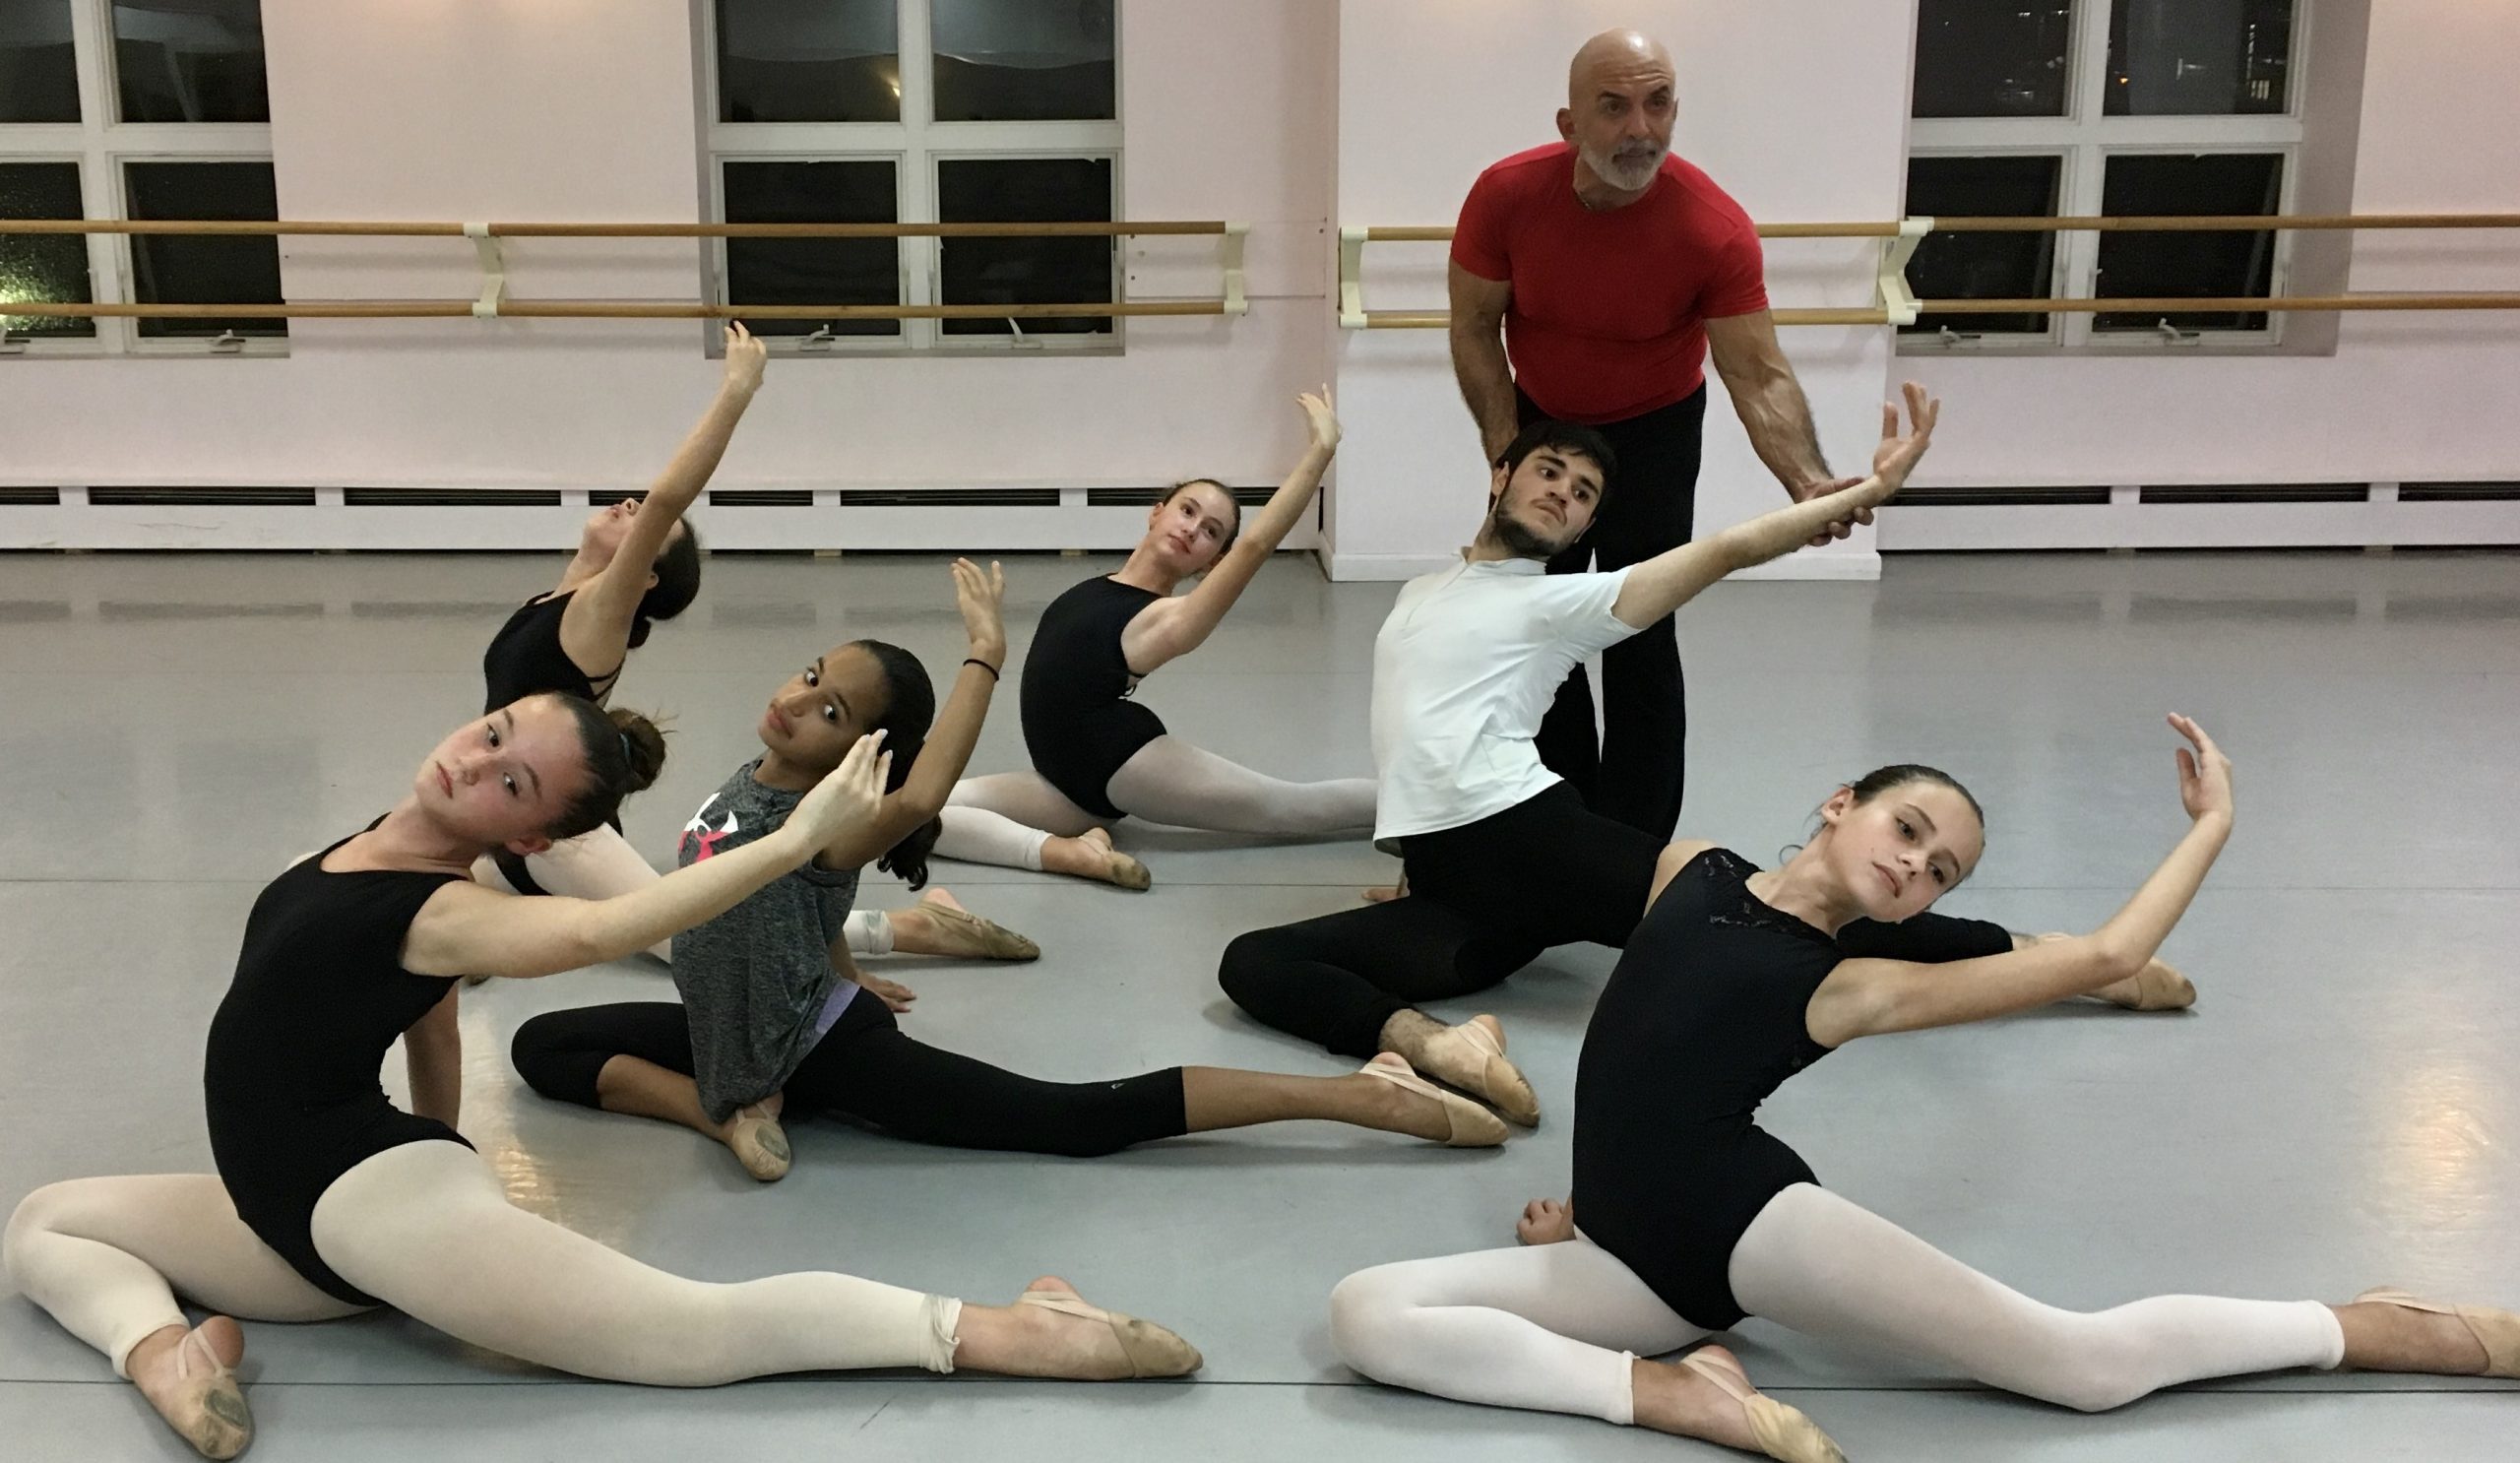 A photo that demonstrates mentoring by Joe Cavise in a jazz class